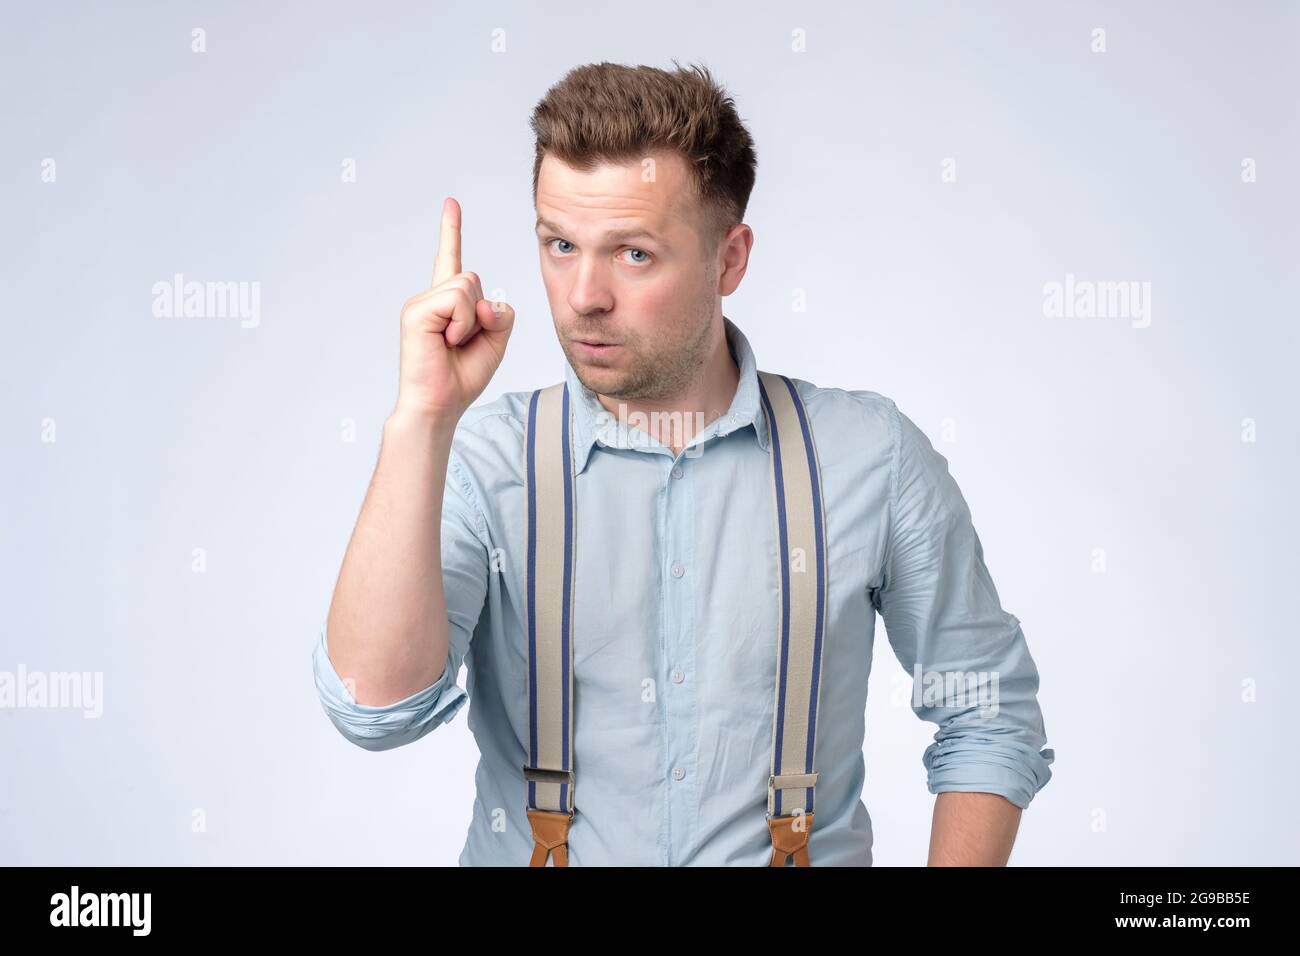 Satisfied young man showing index fingers up, giving advice or recommendation Stock Photo